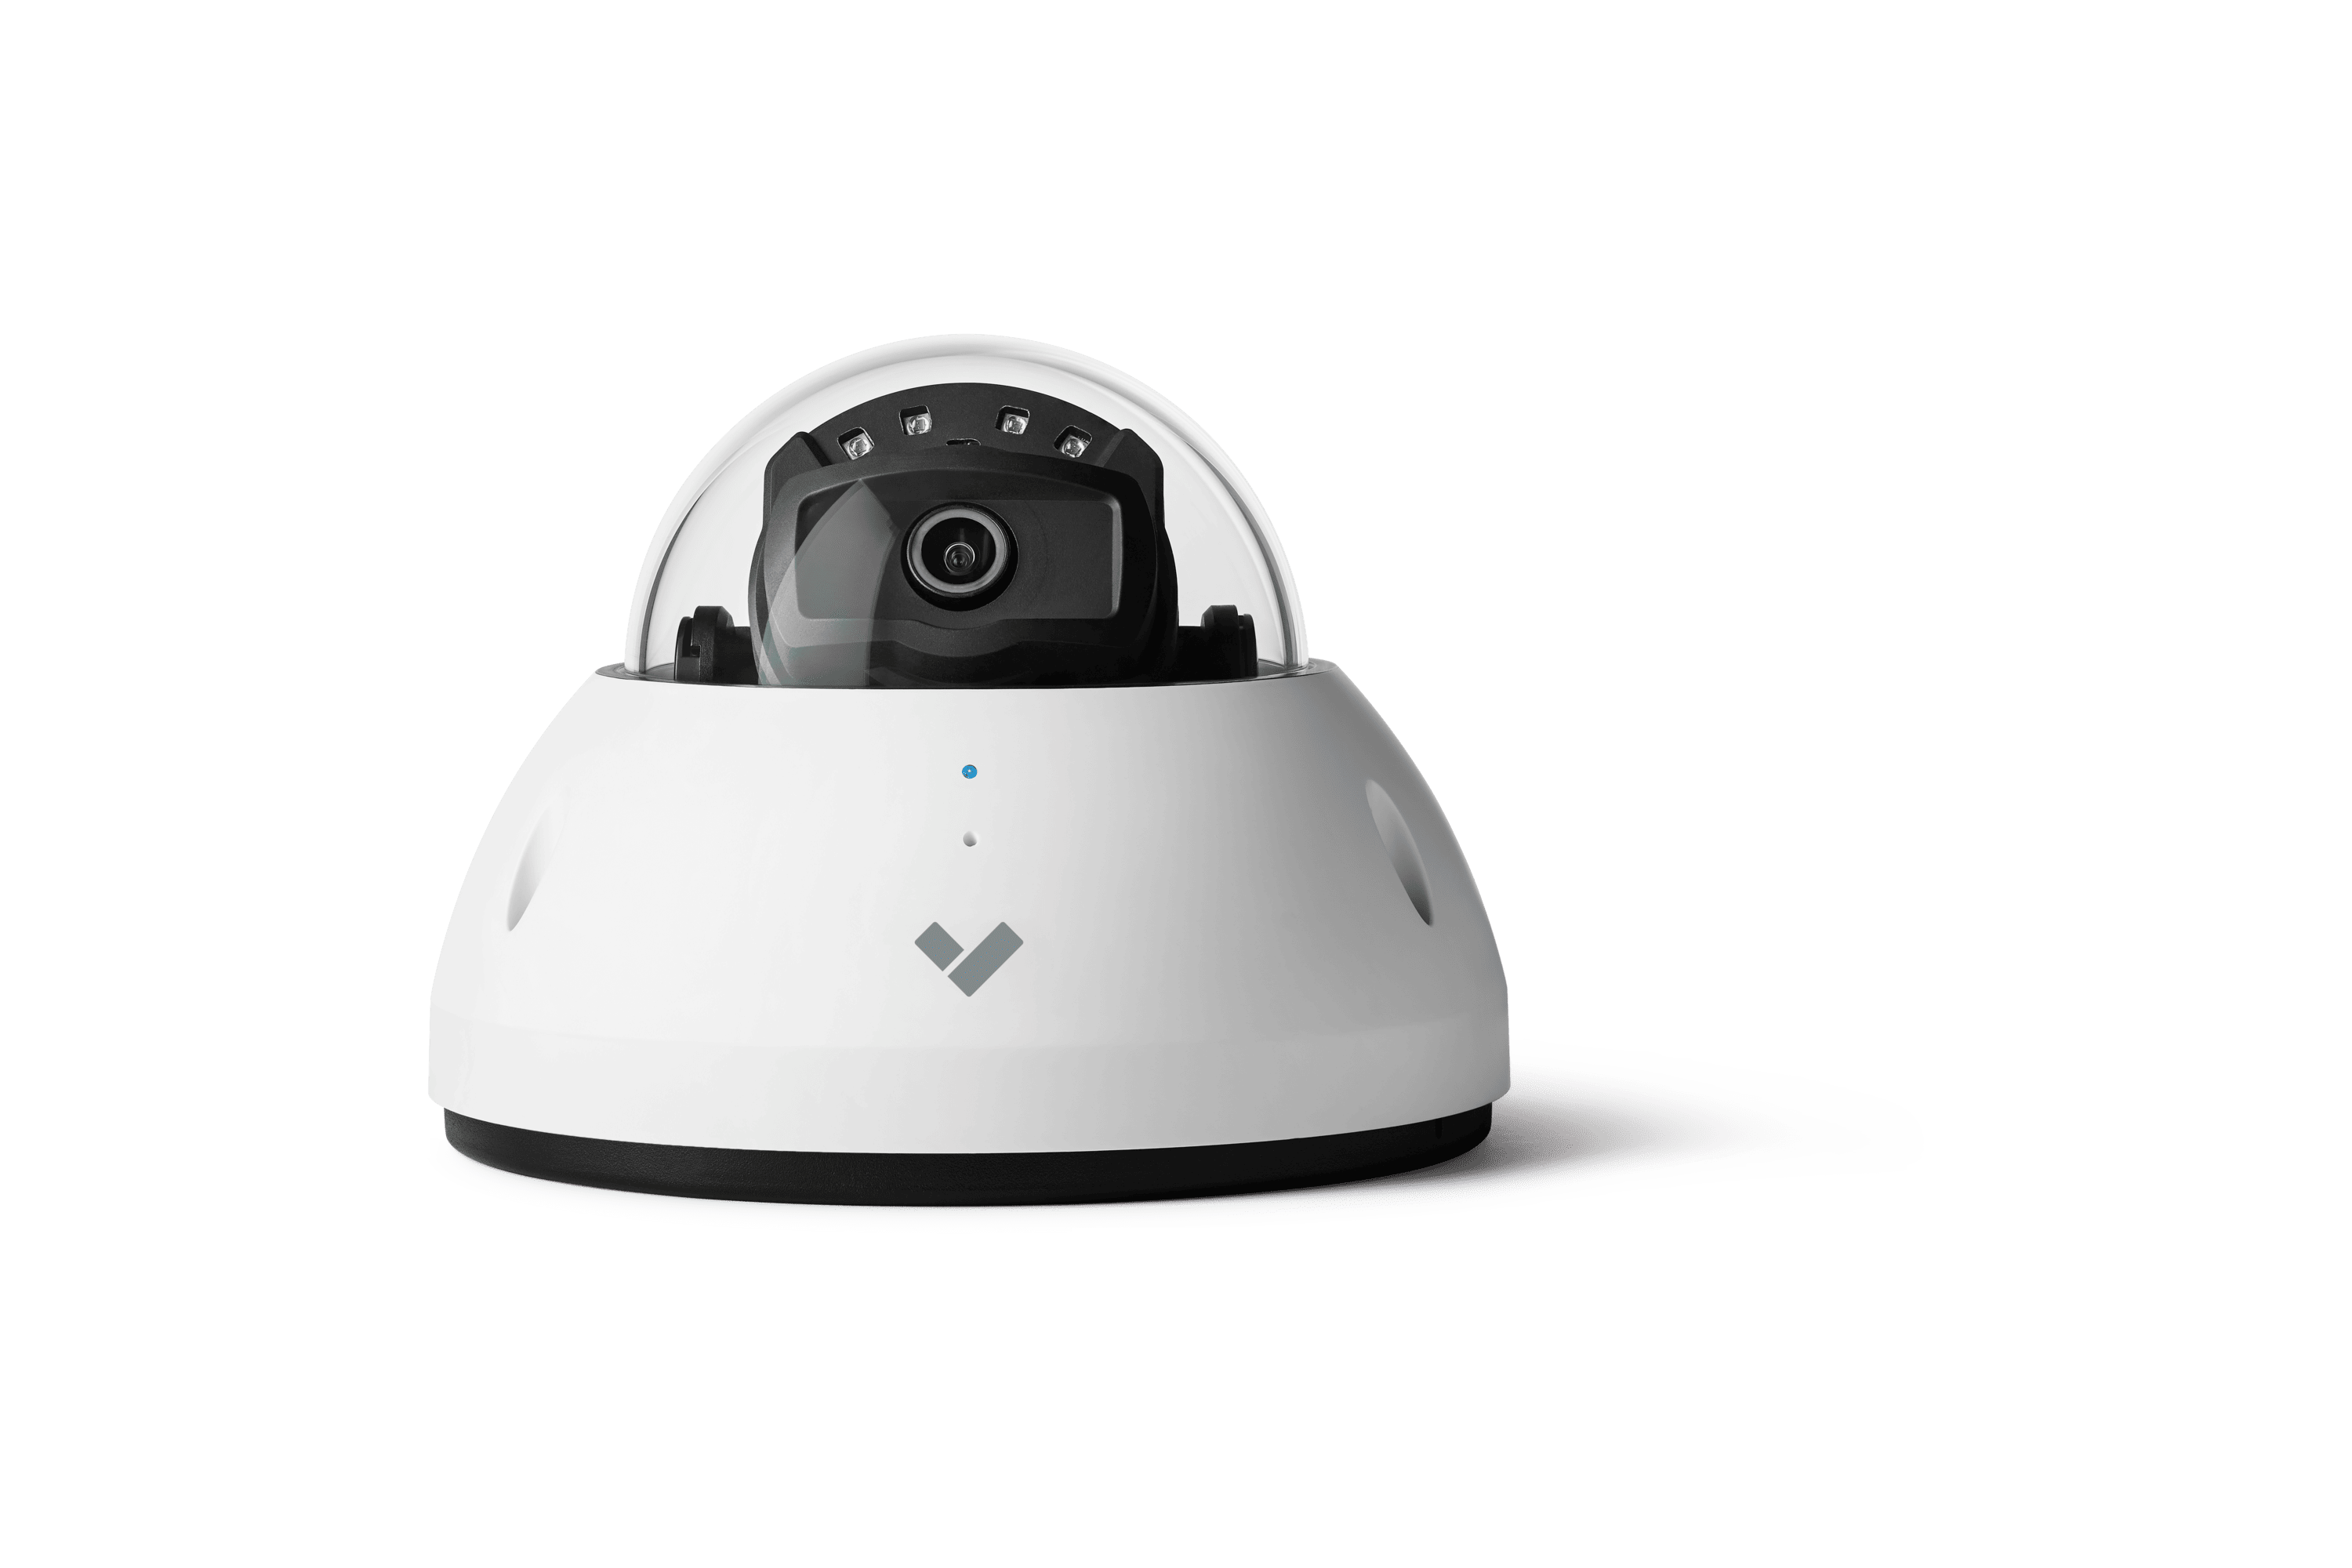 Verkada dome camera for legal audio surveillance in the workplace